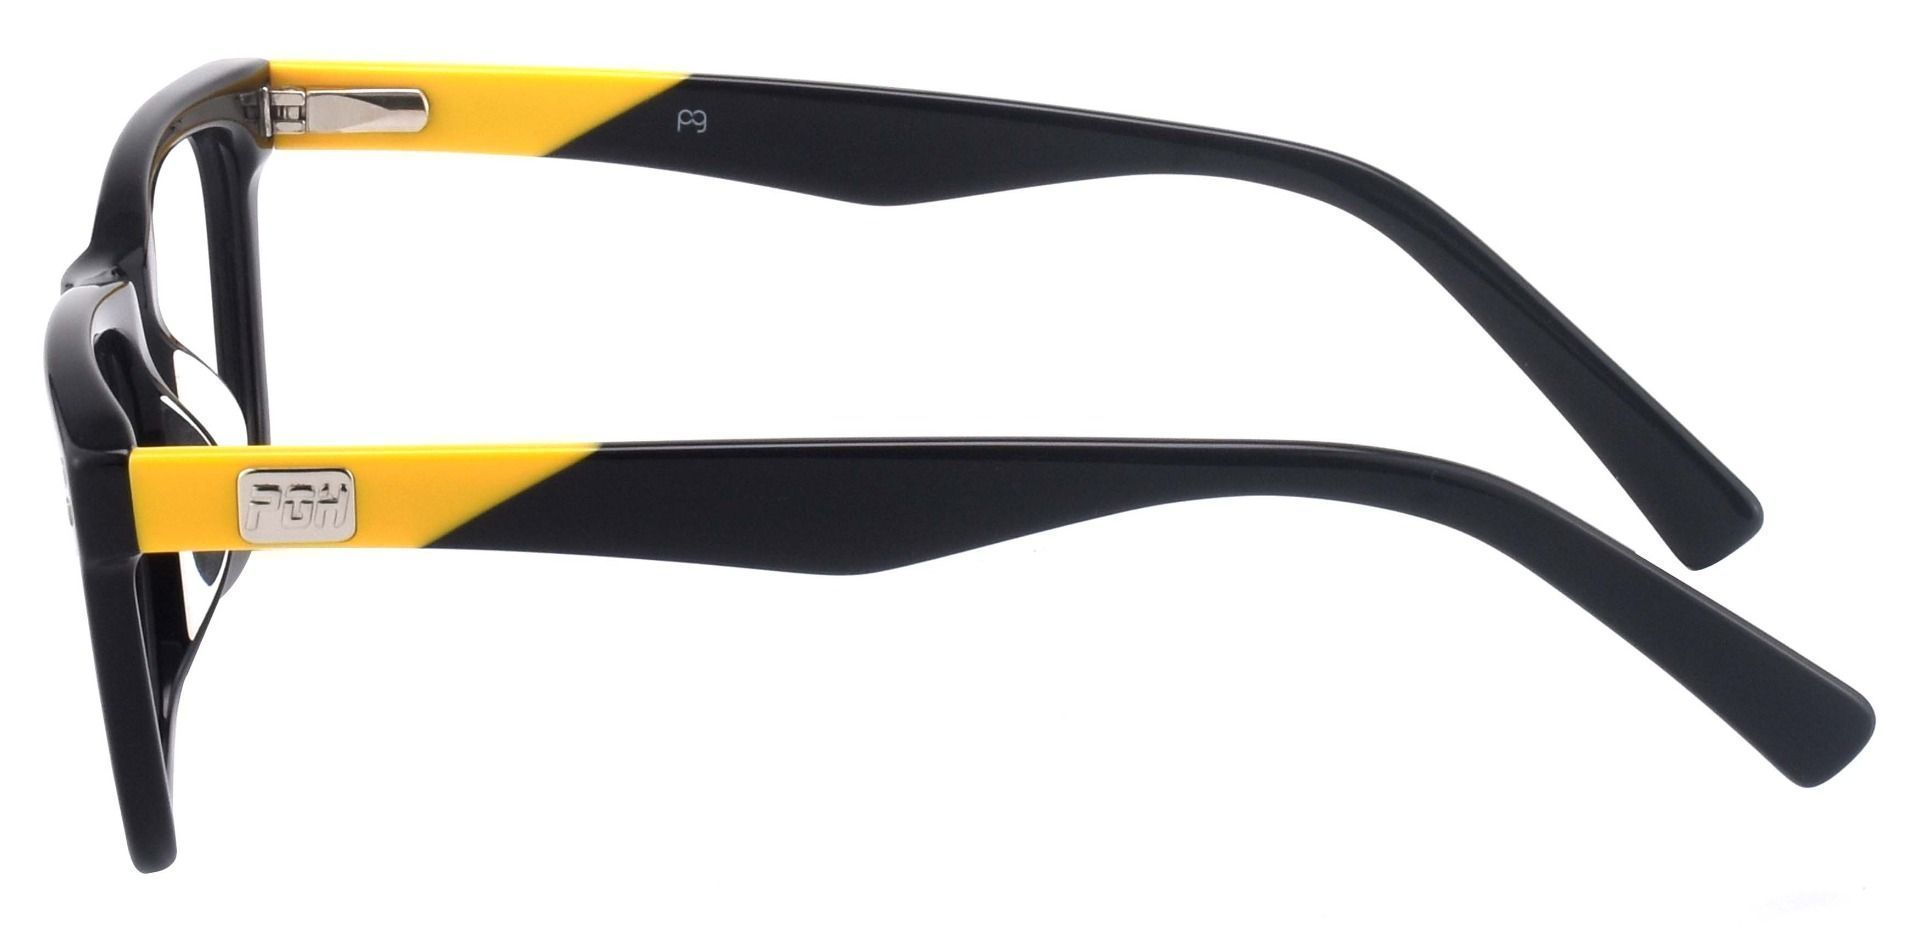 Liberty Rectangle Blue Light Blocking Glasses - The Frame Is Black And Gold